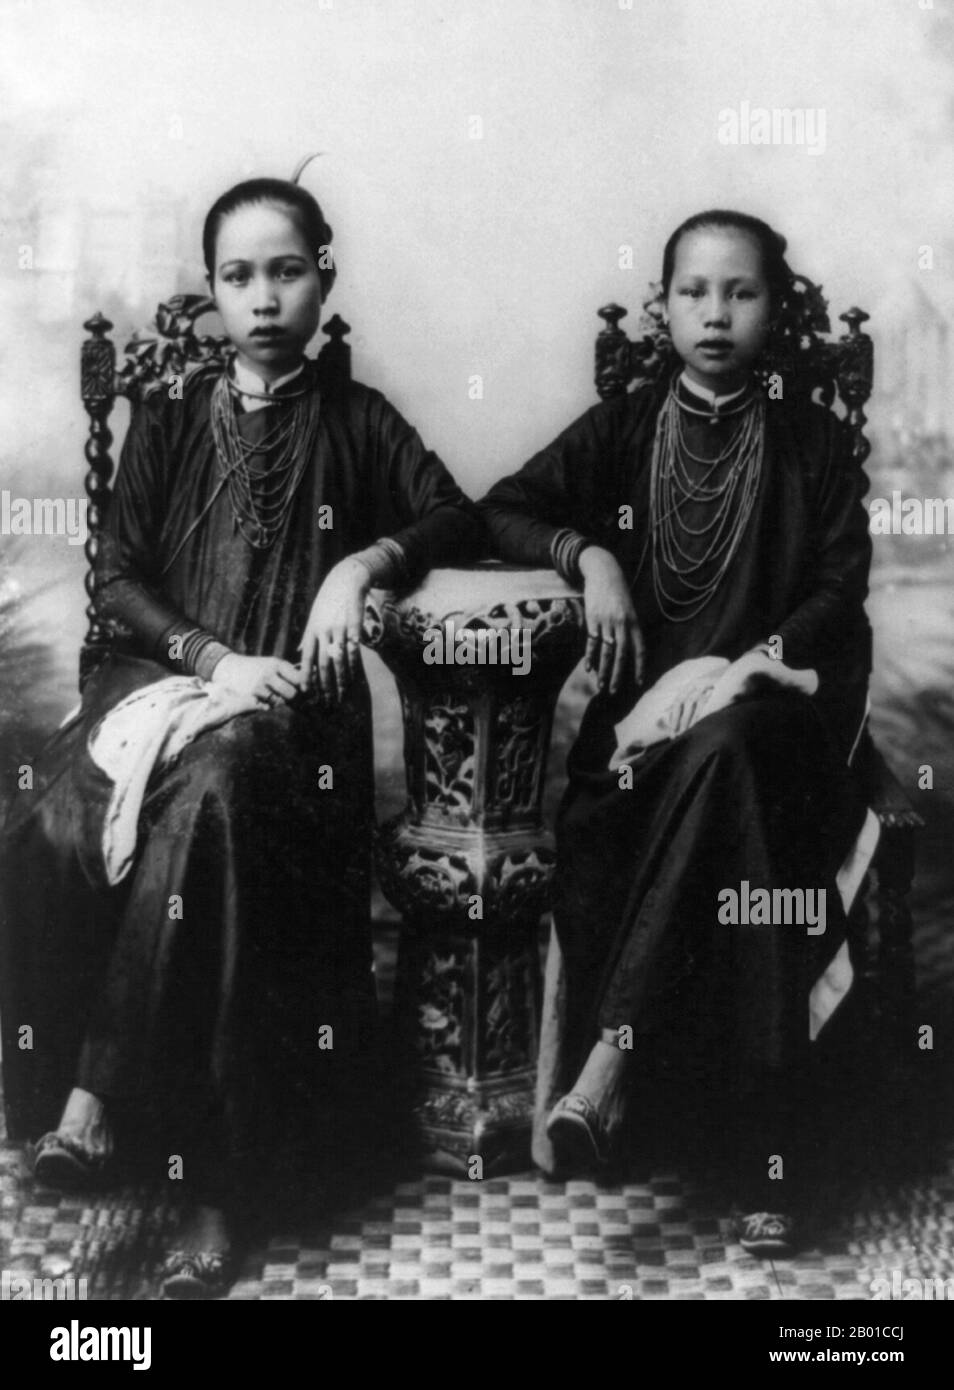 Vietnam: Two young Viet (Kinh) women of Saigon, c. 1905.  Ho Chi Minh City (Vietnamese: Thành phố Hồ Chí Minh, better known as Saigon (Vietnamese: Sài Gòn) is the largest city in Vietnam. It was once known as Prey Nokor, an important Khmer sea port prior to annexation by the Vietnamese in the 17th century.  Under the name Saigon, it was the capital of the French colony of Cochin-china and later of the independent state of South Vietnam from 1955 to 1975. In 1976, Saigon merged with the surrounding Gia Định Province and was officially renamed Hồ Chí Minh City after Hồ Chí Minh. Stock Photo